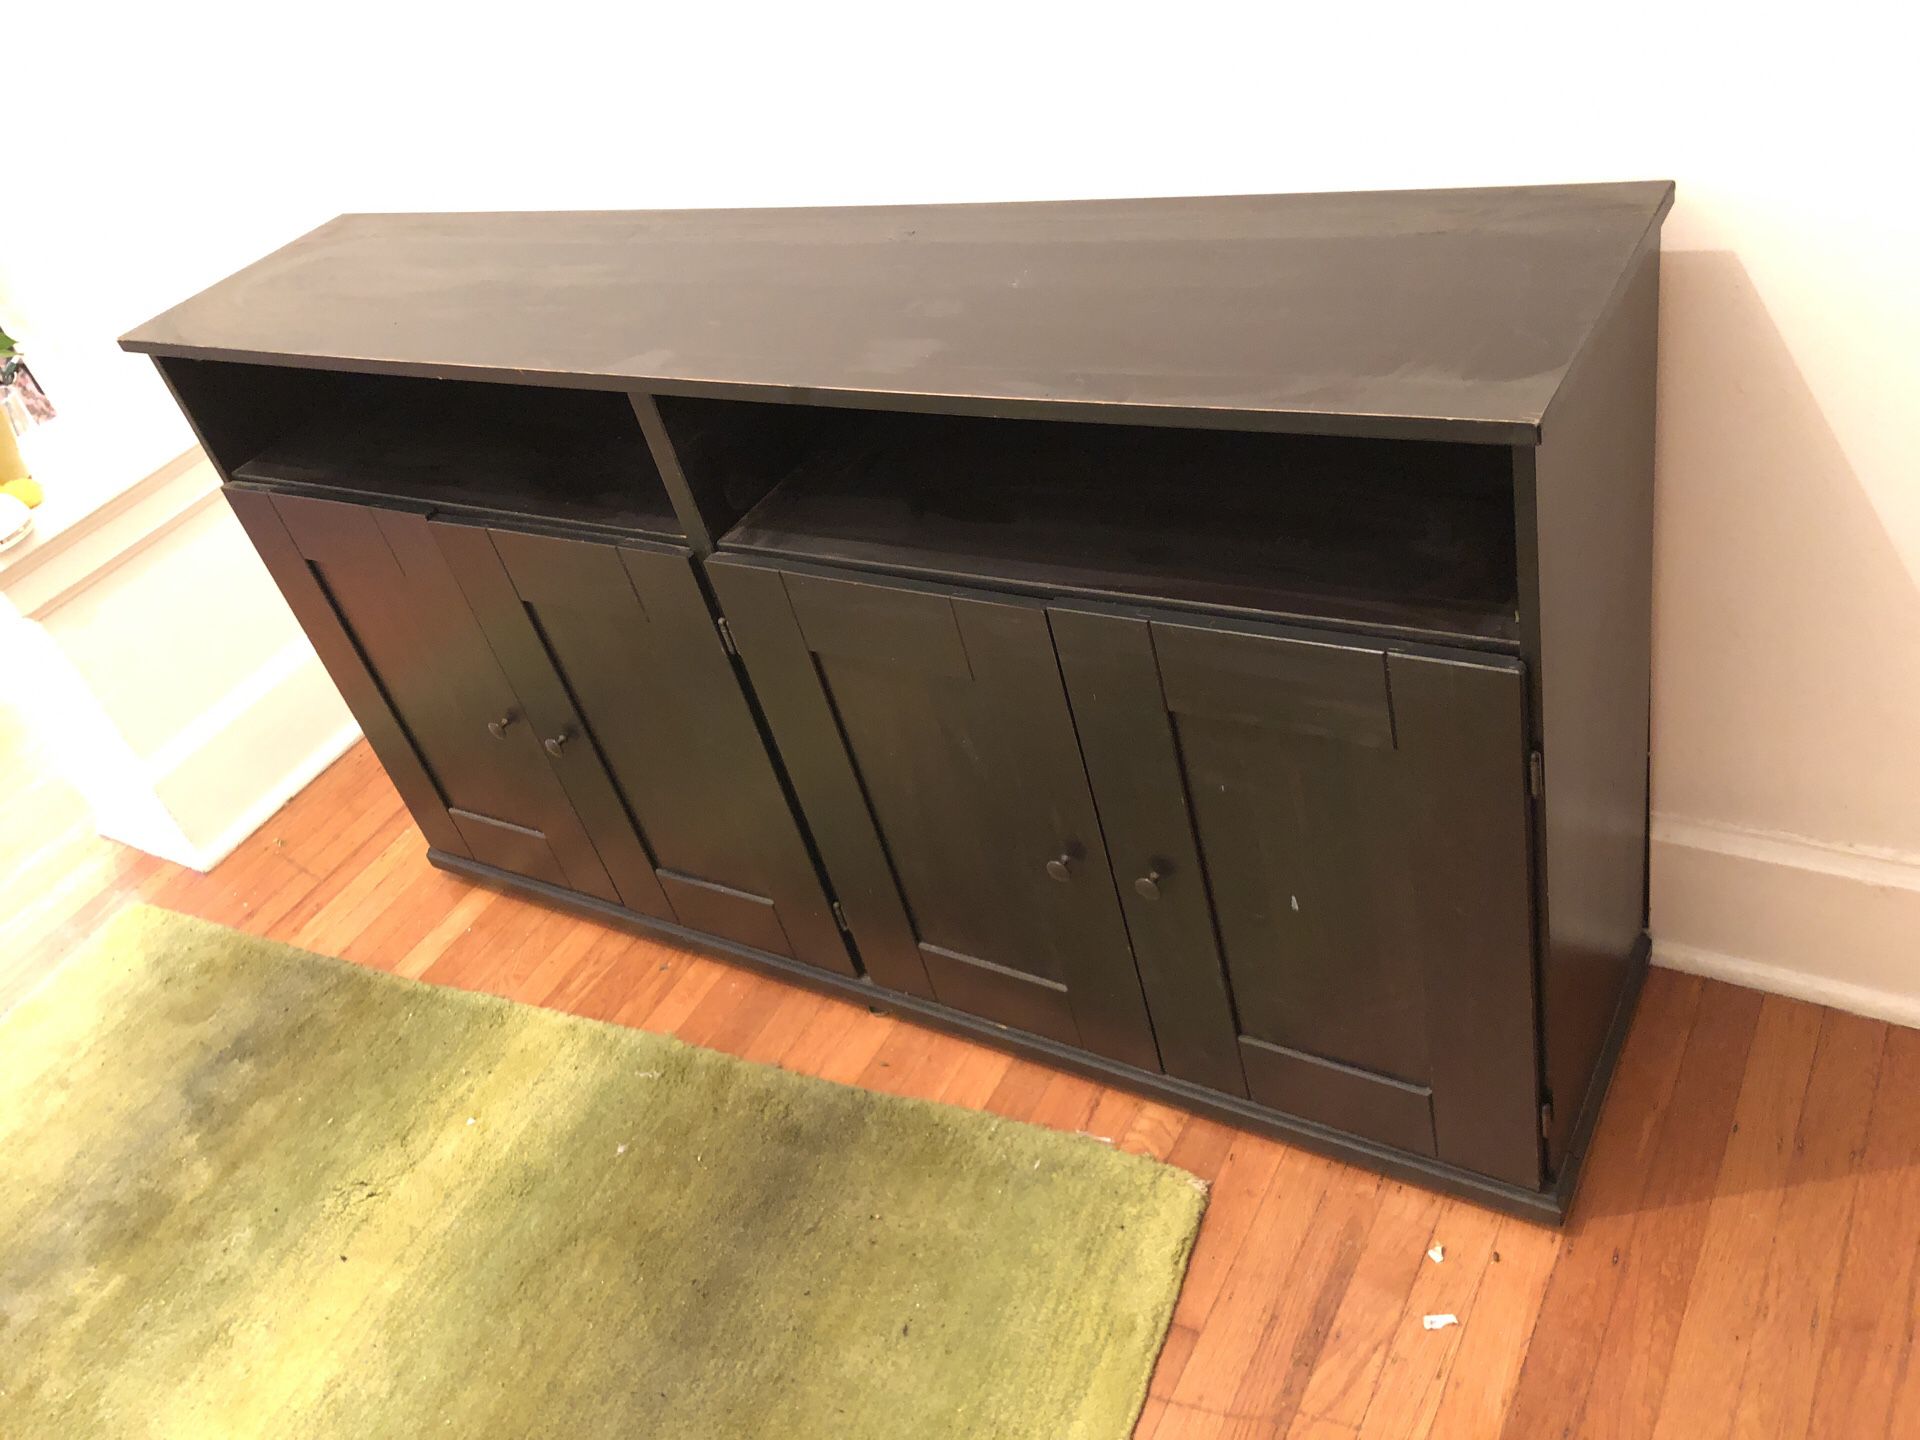 FREE MUST PICK UP RIGHT NOW IKEA entertainment center/armoire/shelving